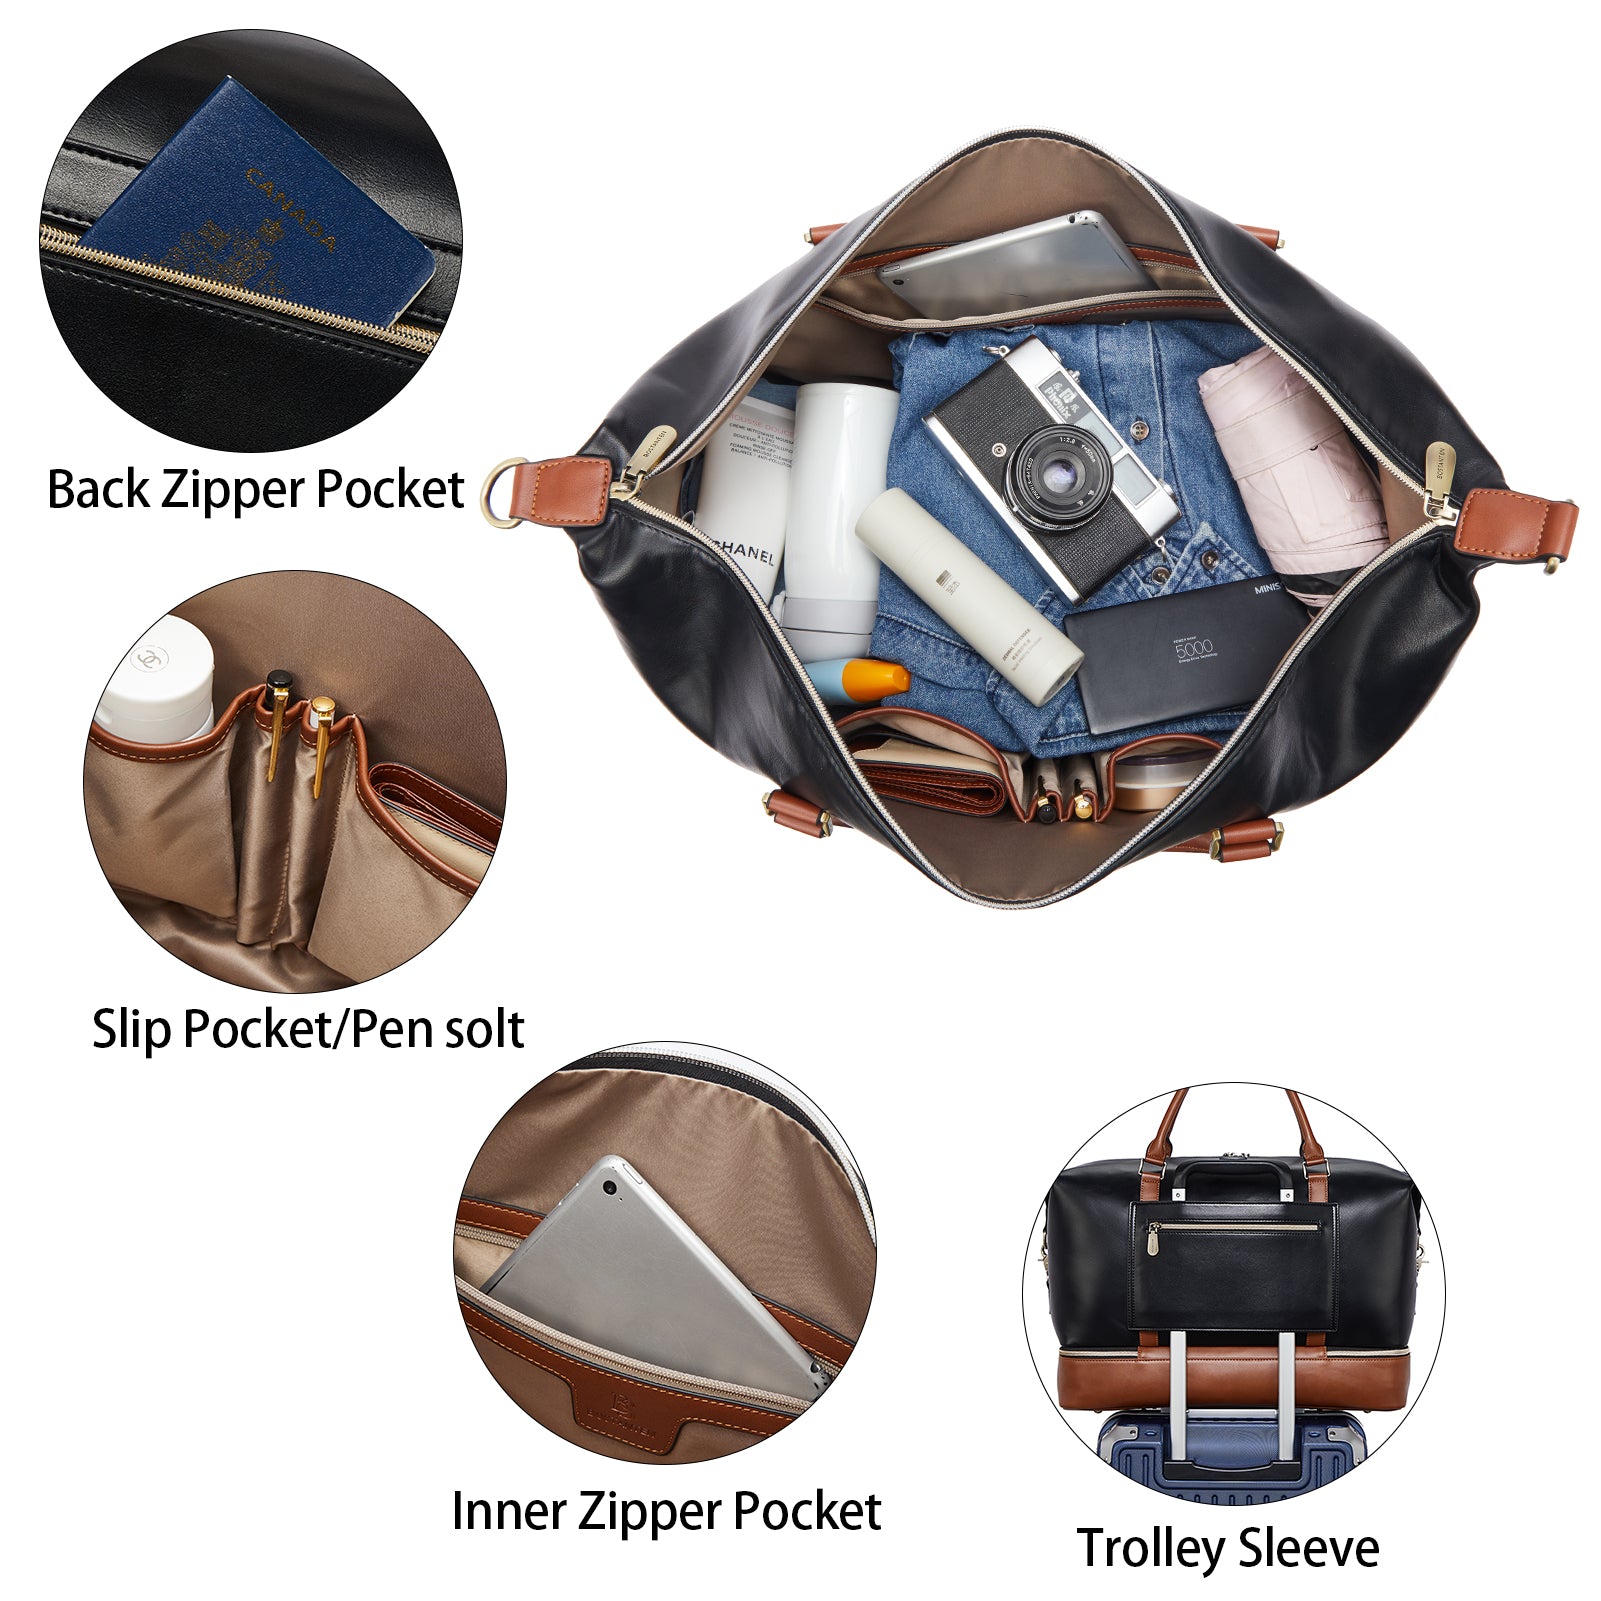 Judea Leather Travel Duffle Bag with Multiple Compartments | Bostanten ...